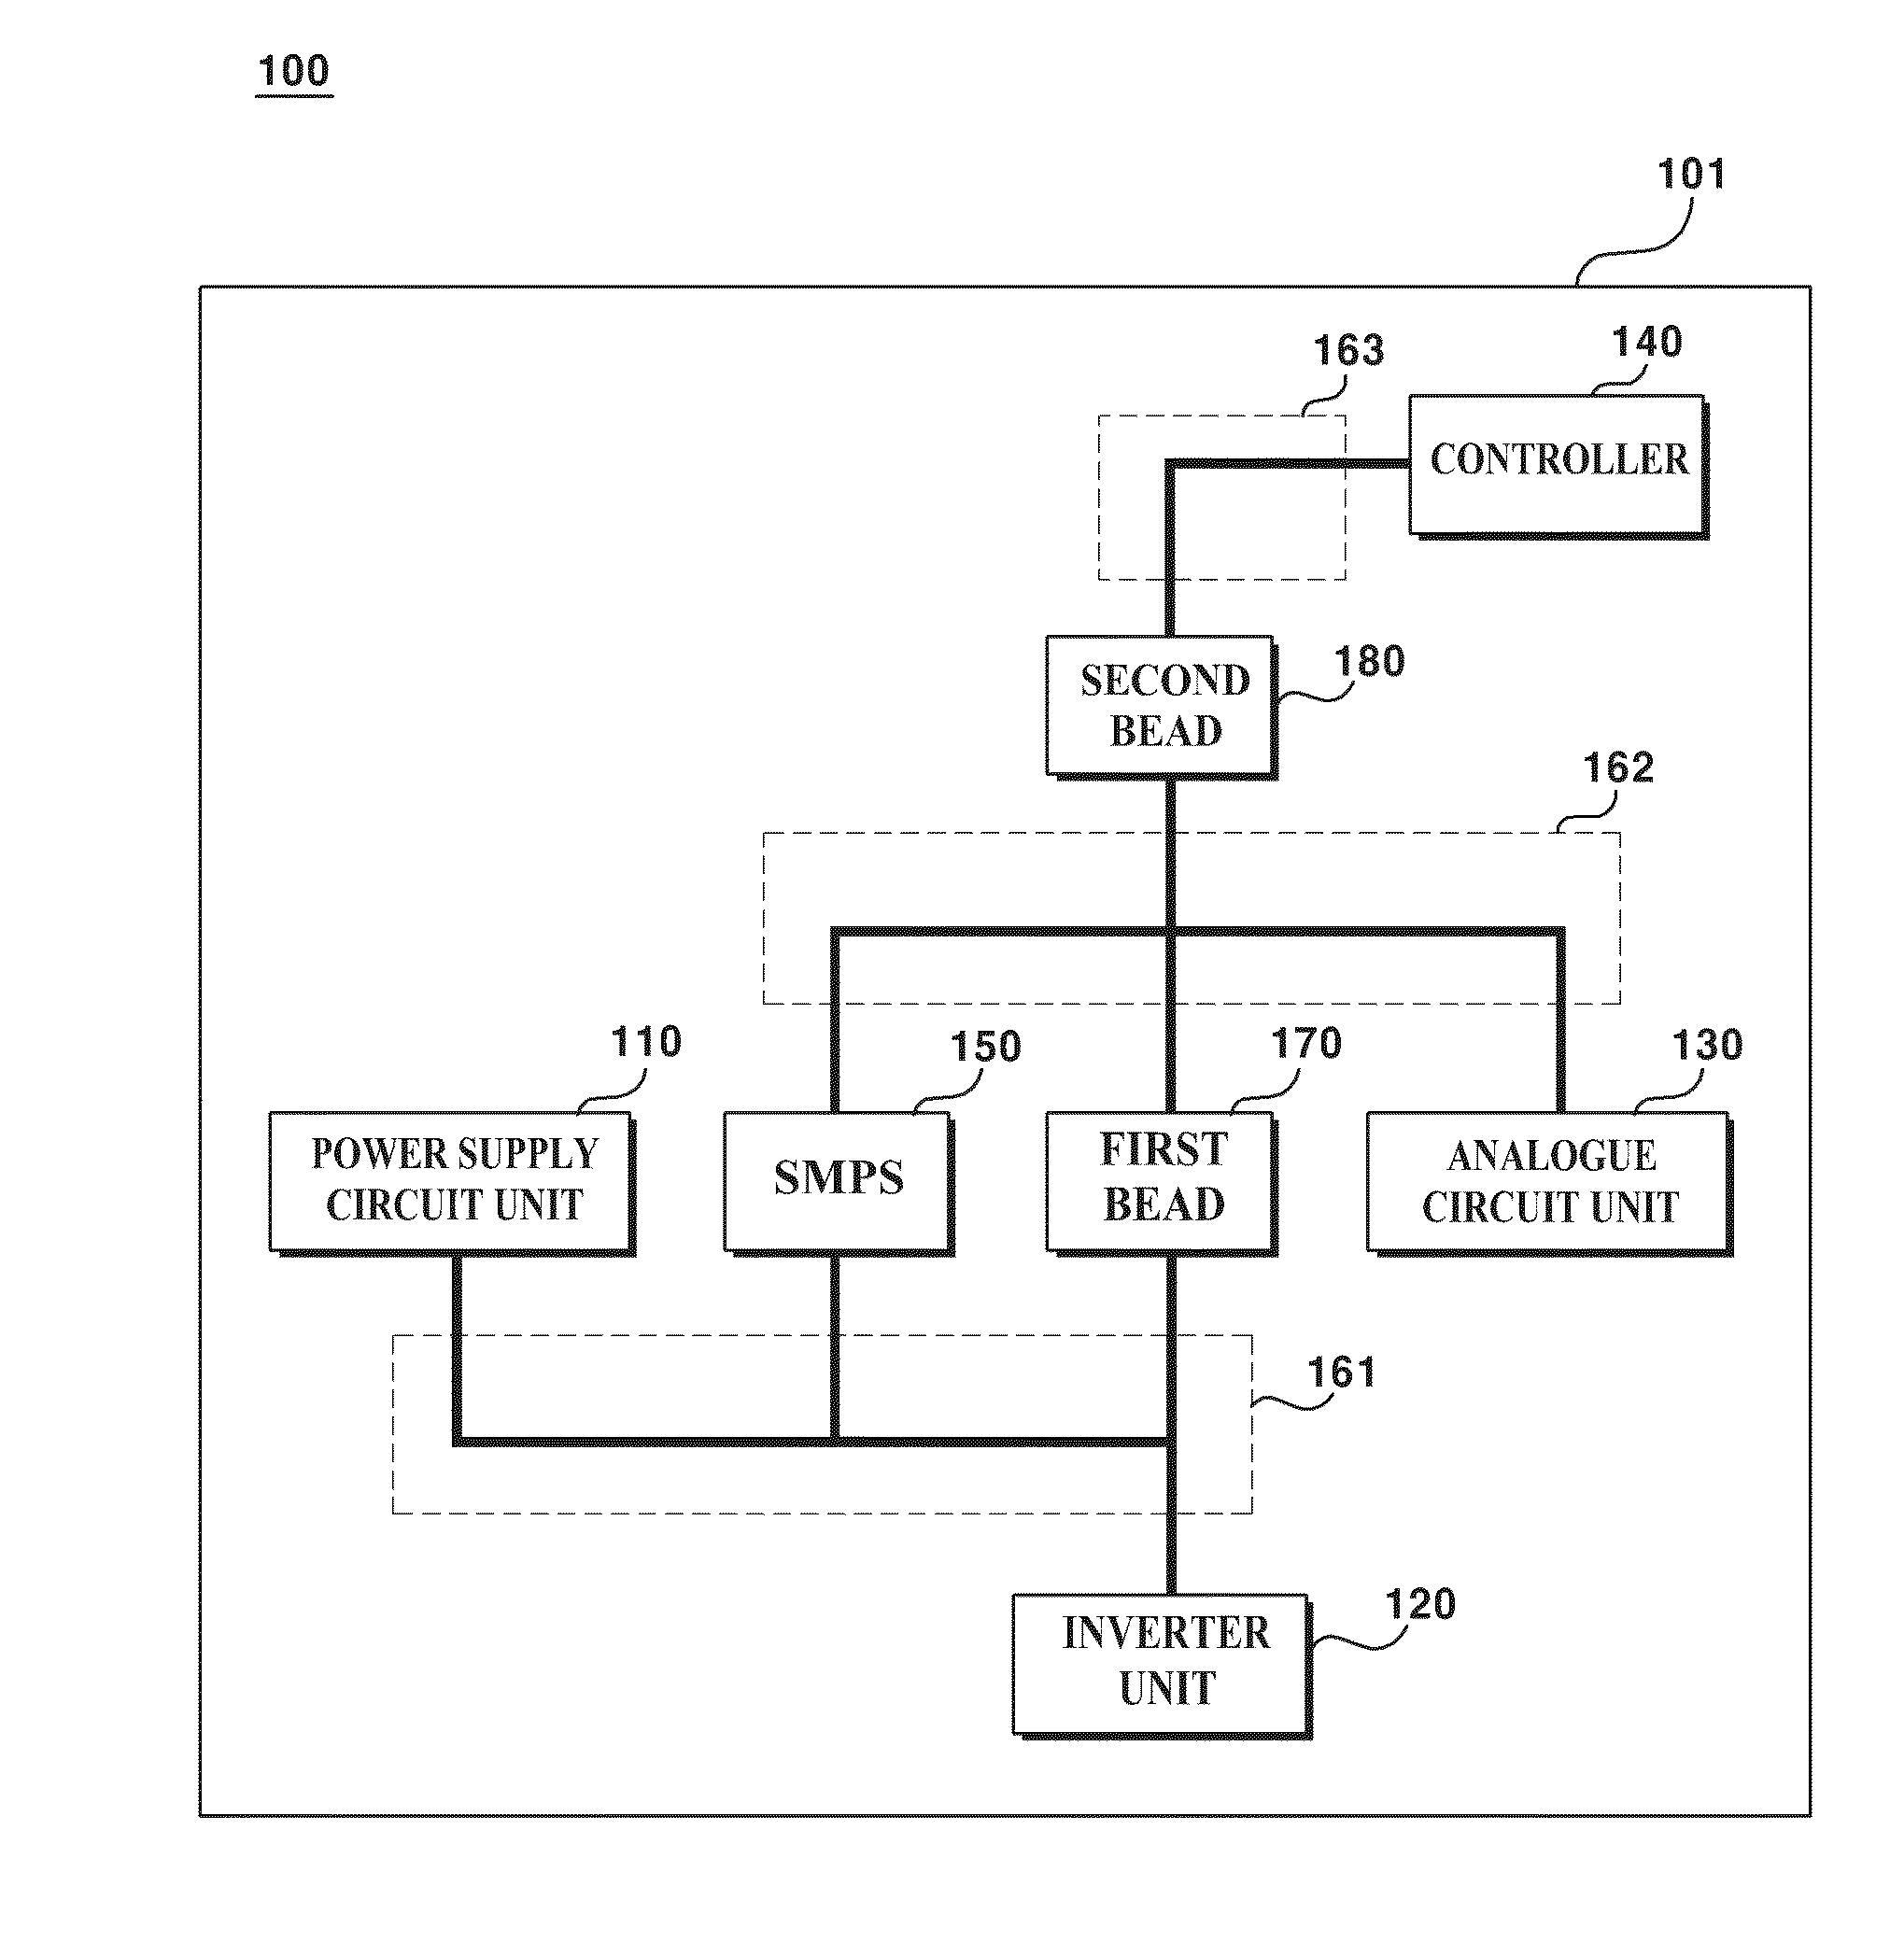 Inverter assembly without galvanic isolation